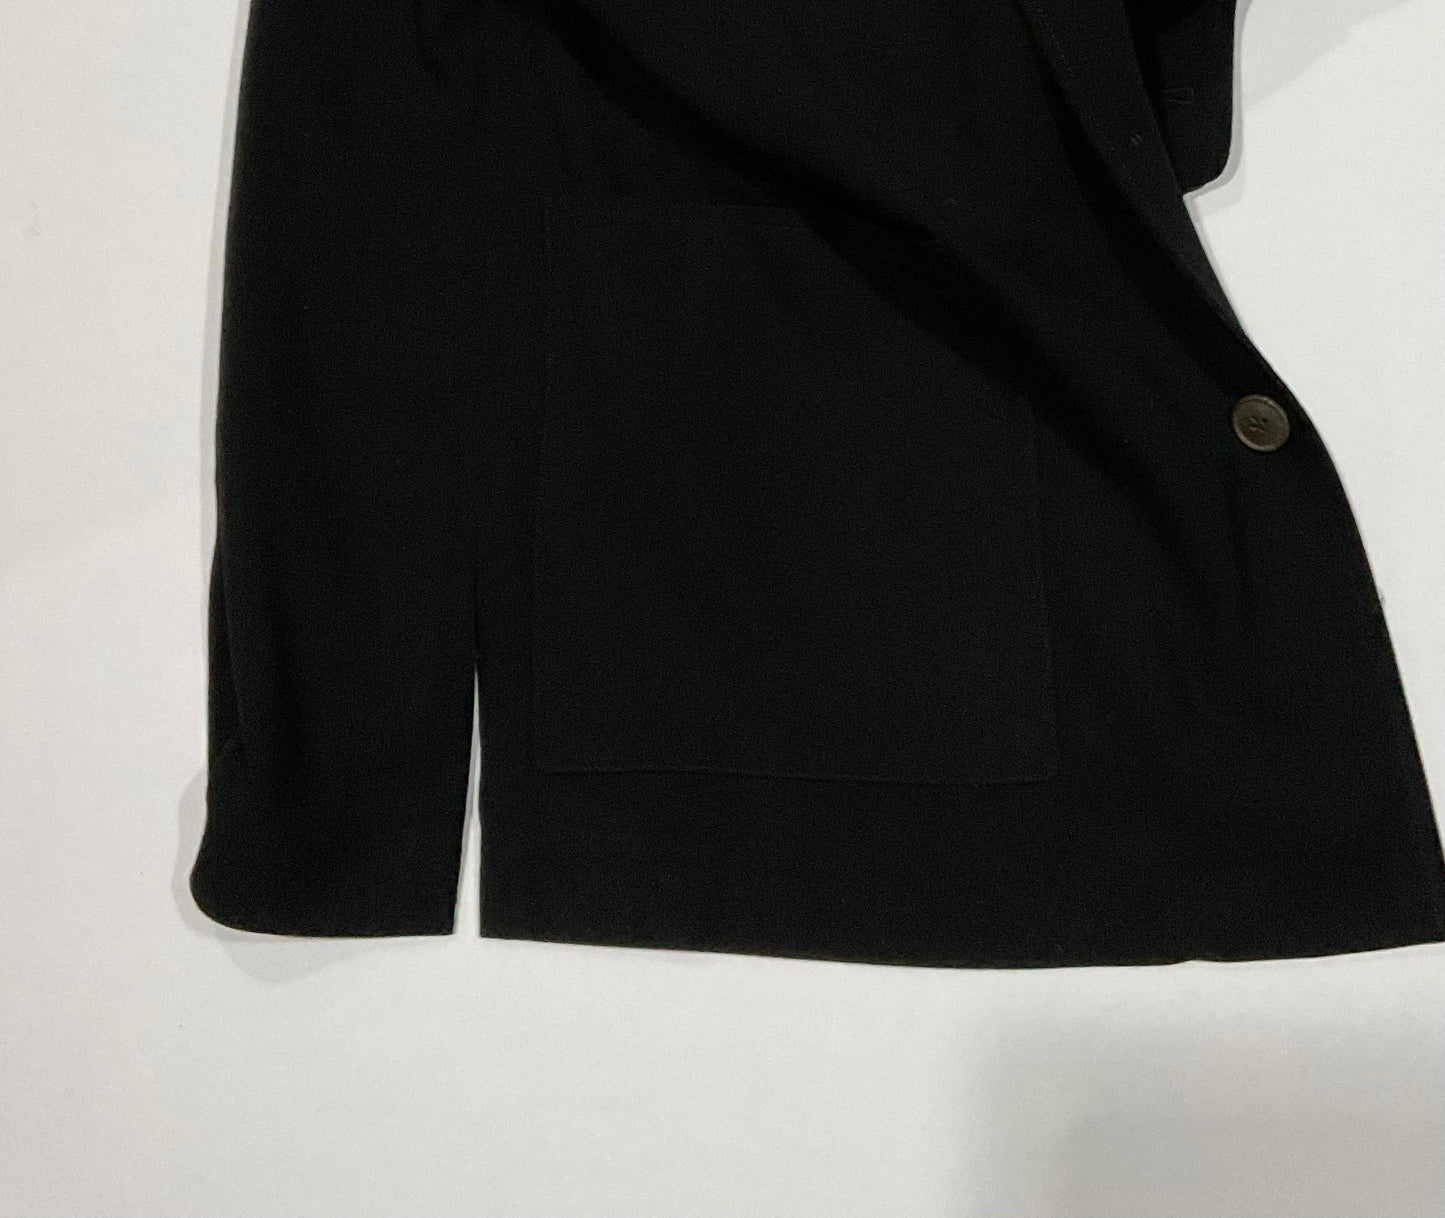 R P SUIT / BLACK CREPE 4 BUTTON / UNCONSTRUCTED / MEDIUM - LARGE / MADE IN USA